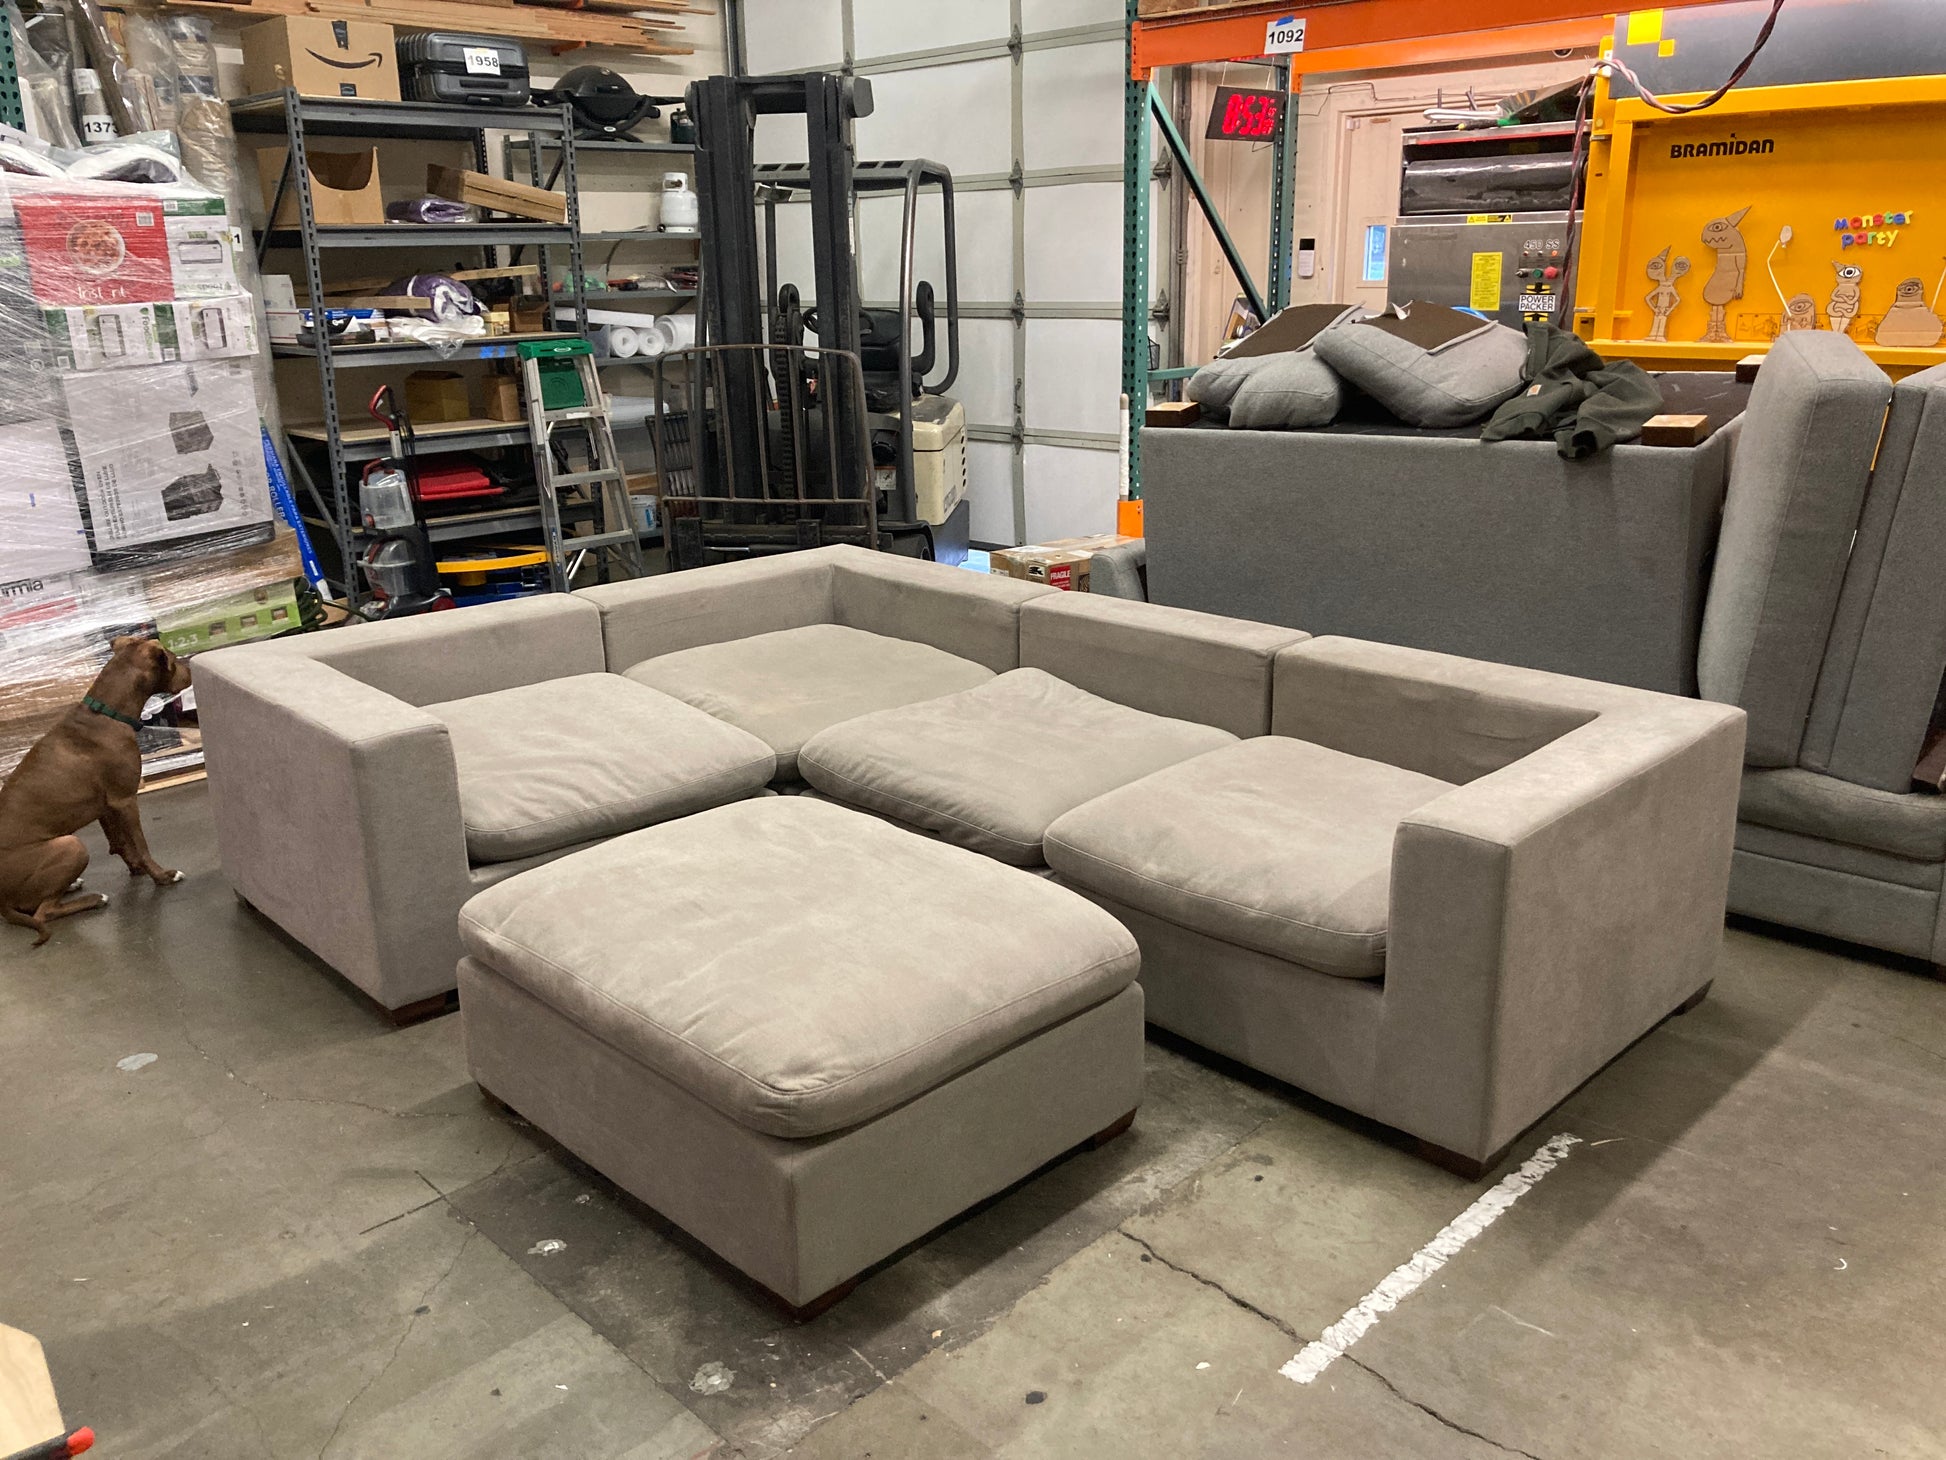 Costco - Thomasville Lowell 6-piece Fabric Modular Sectional - Retail $1999 Default Title